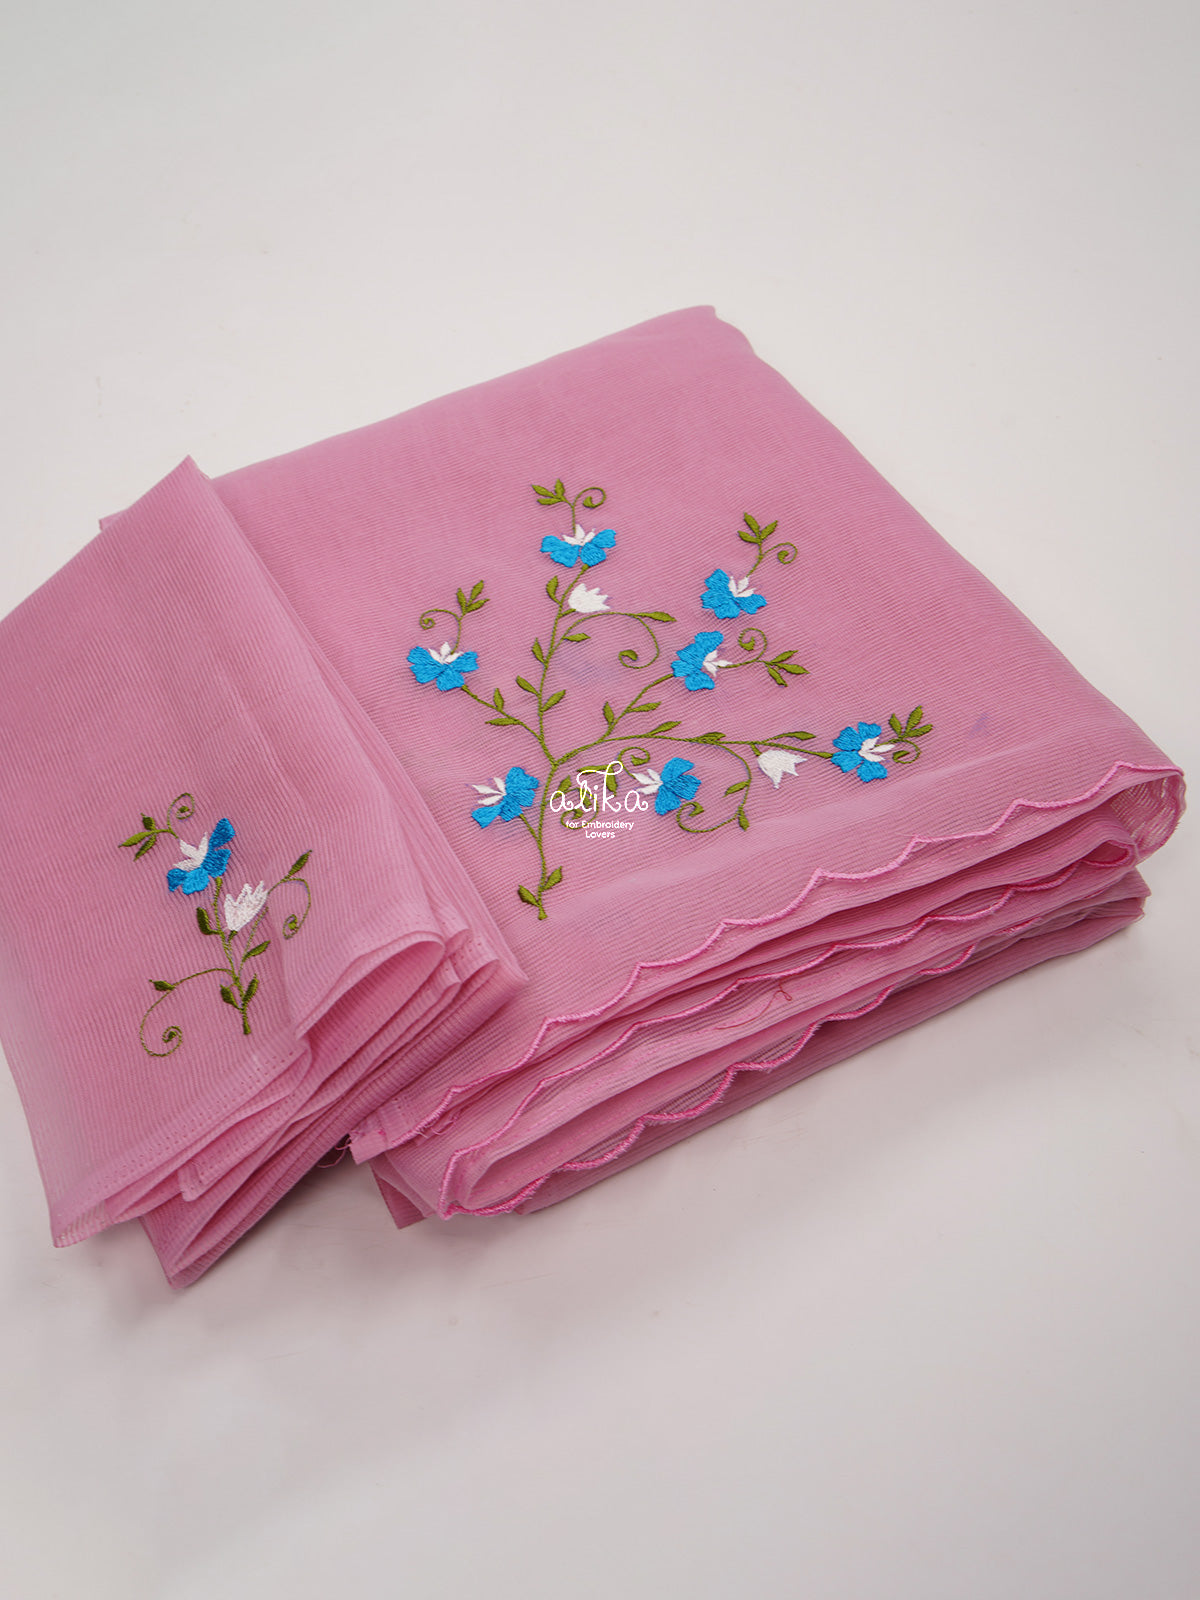 PINK KOTA SAREE WITH WHITE AND BLUE FLORAL MACHINE EMBROIDERY